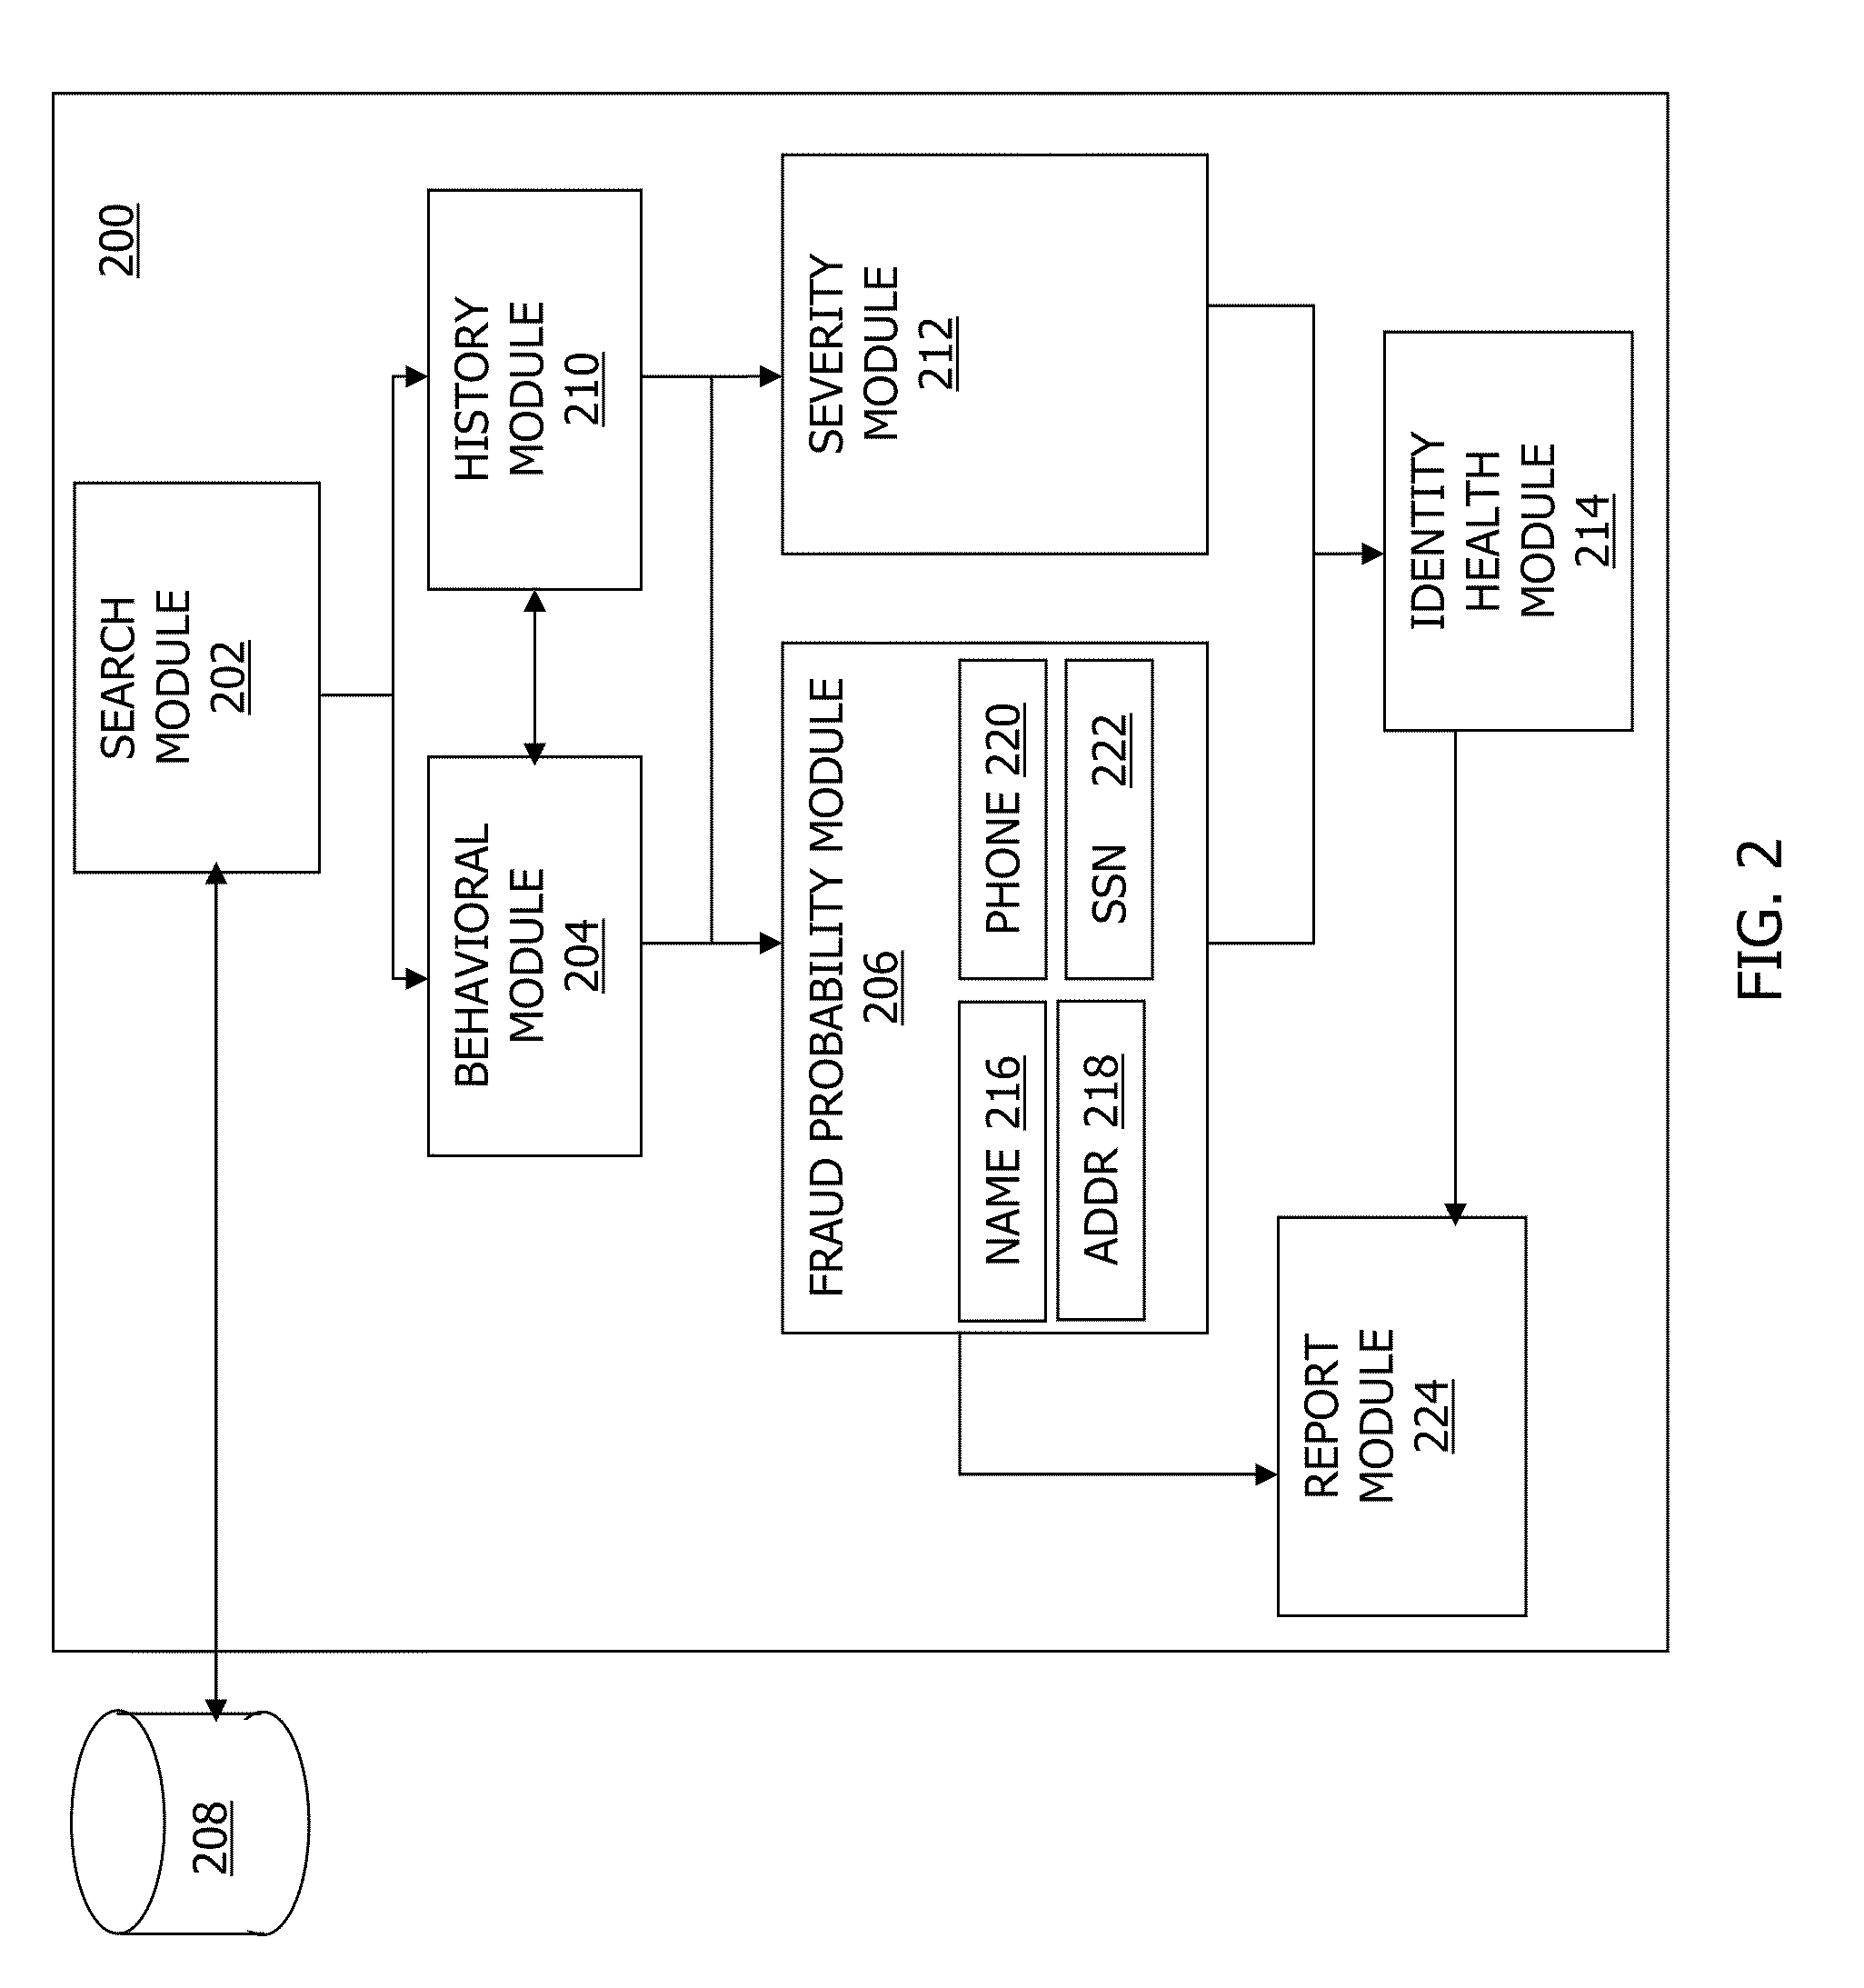 Systems, methods, and apparatus for determining fraud probability scores and identity health scores